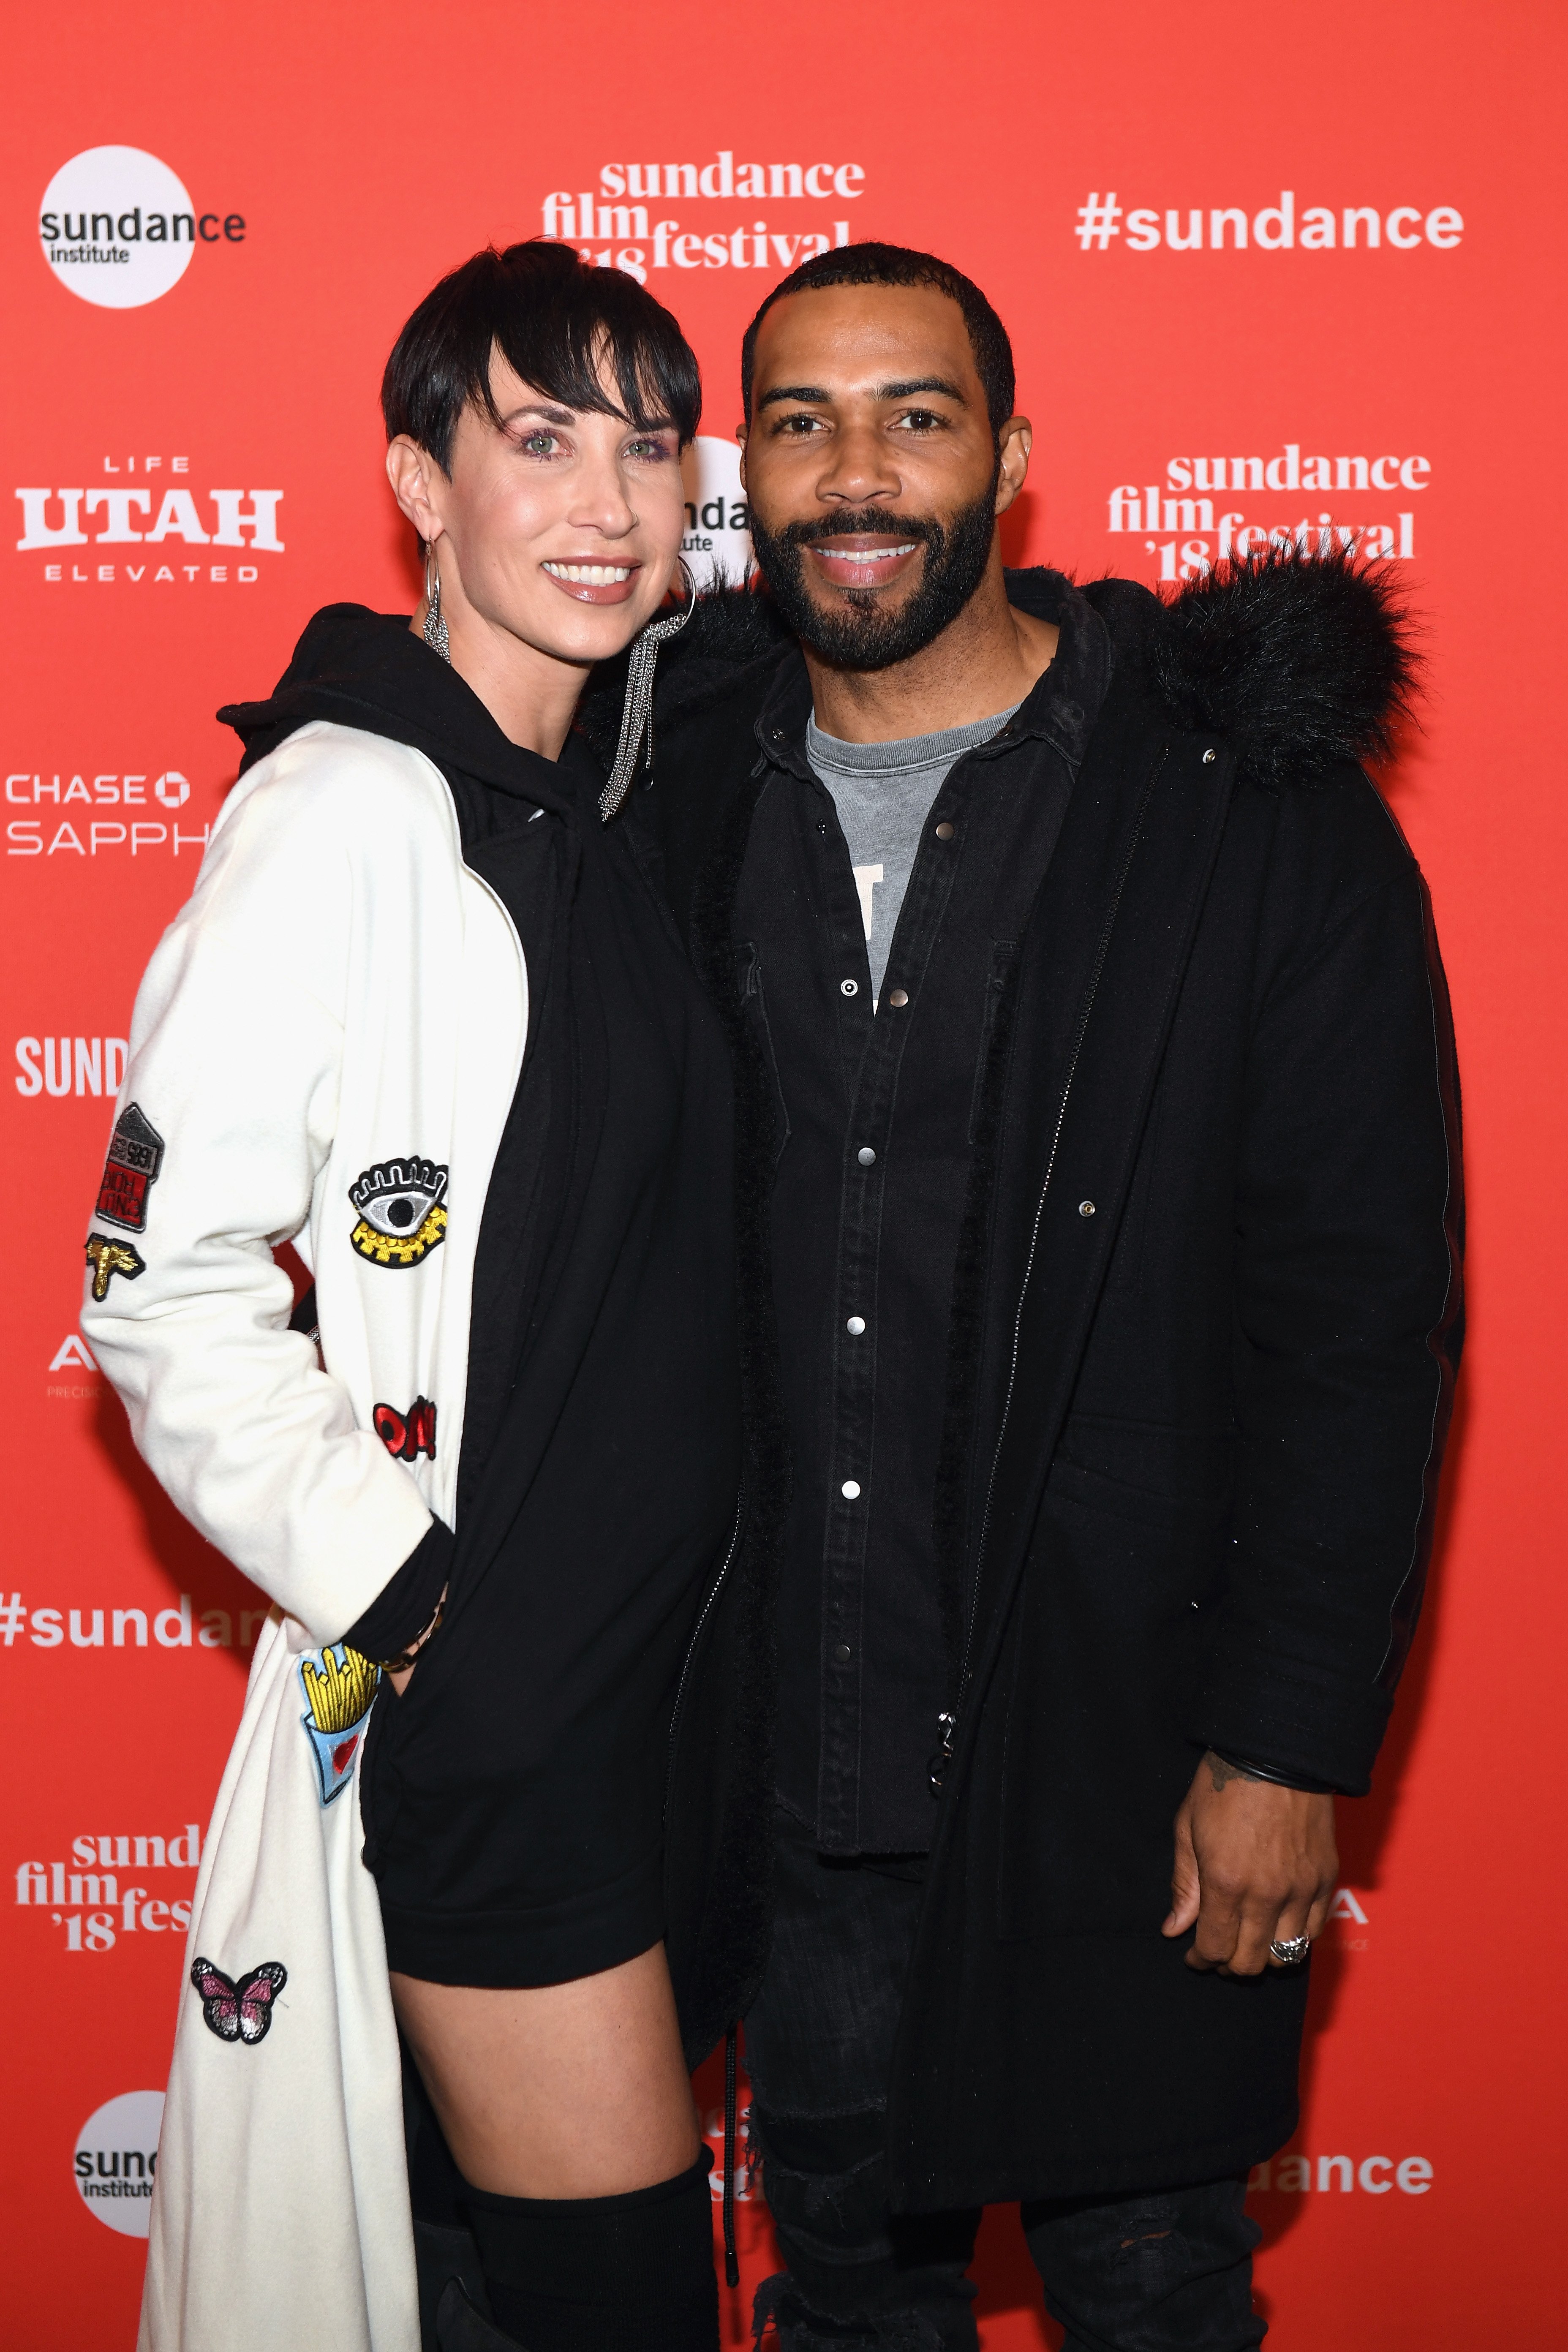 Omari Hardwick and Jae Pfautch attending the premiere of "Sorry to Bother You" during the Sundance Film Festival in January 2018. | Photo: Getty Images